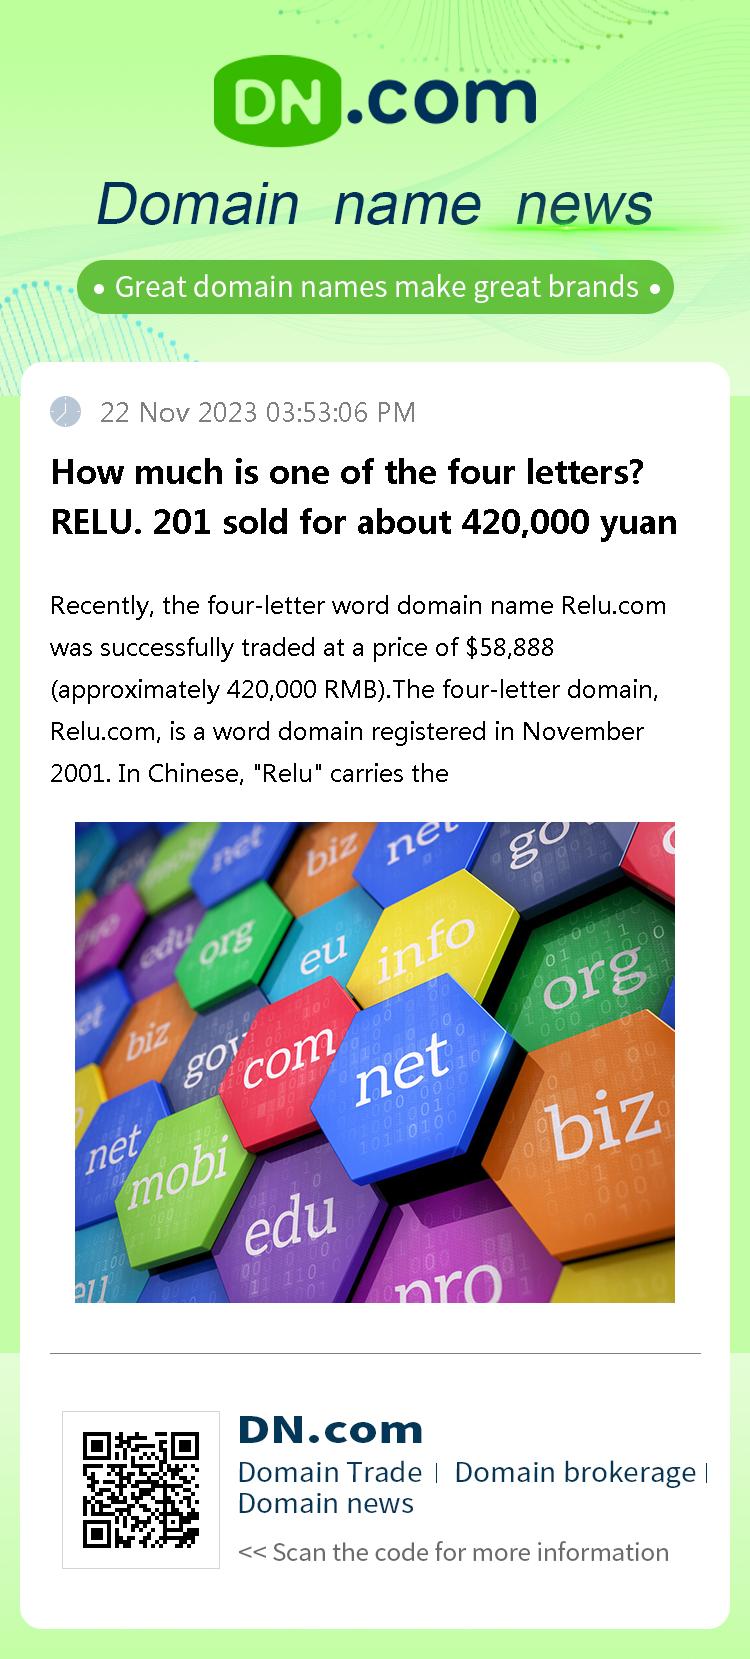 How much is one of the four letters? RELU. 201 sold for about 420,000 yuan